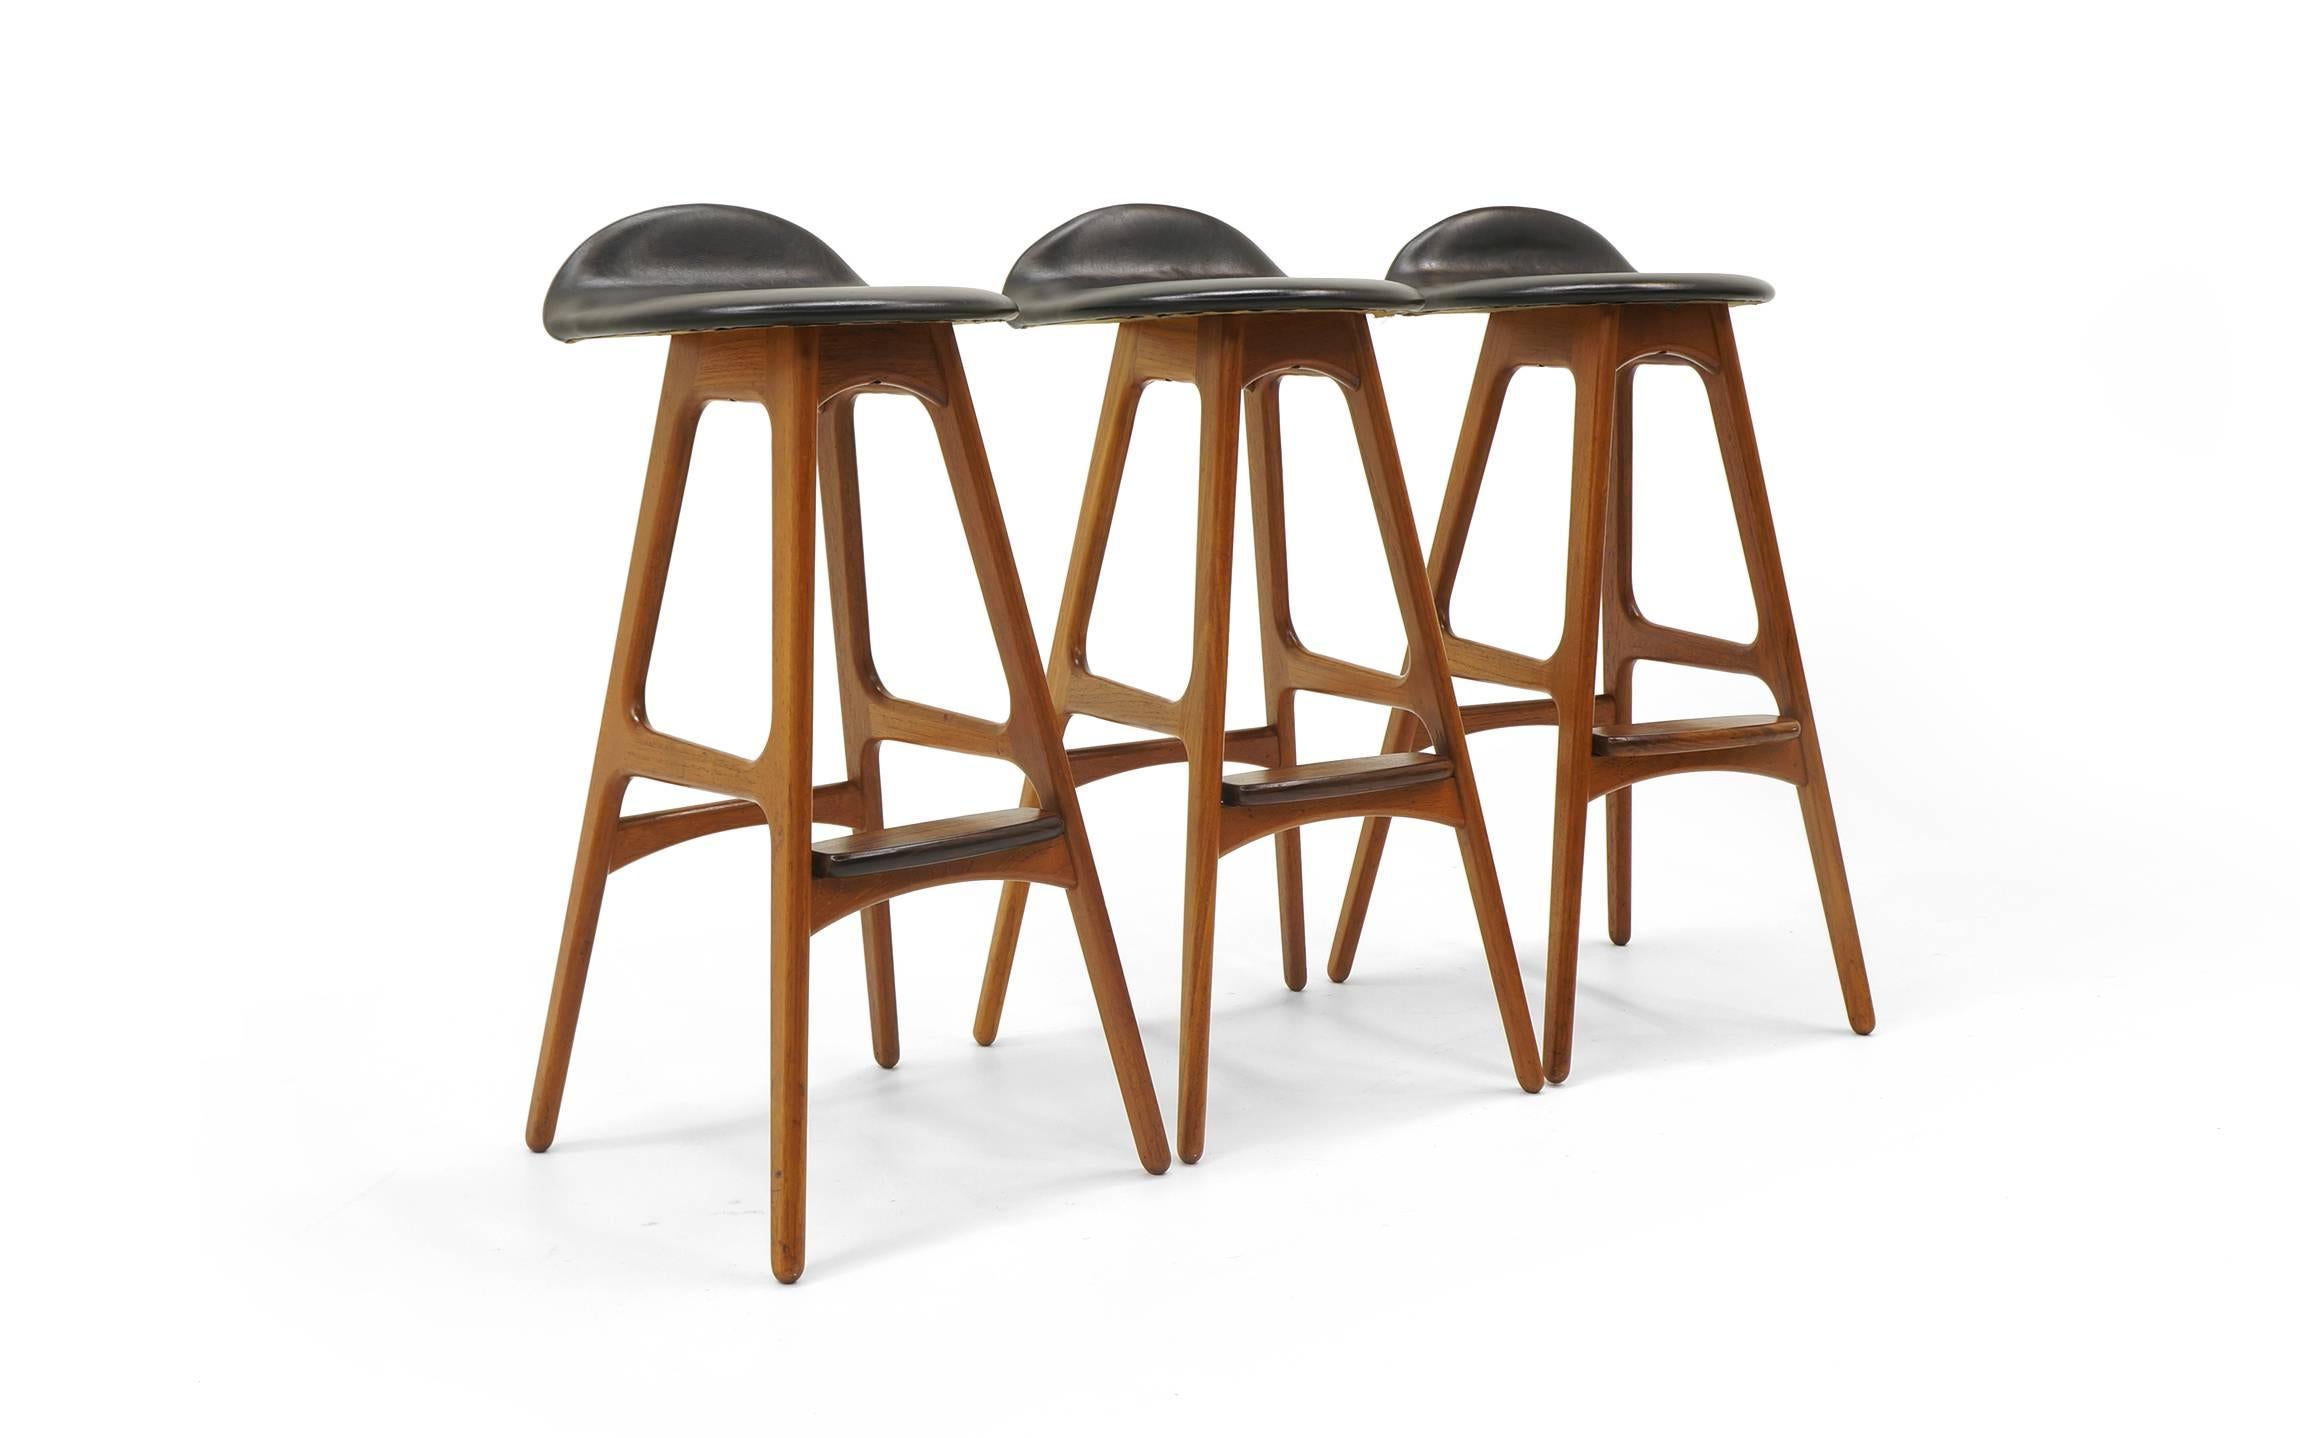 Three Erik Buch Danish modern barstools. Teak frames and rosewood footrests with original black leather seats. 30 inch seat height. Seat back is 33 inches high. The price is per stool. Buy one, two, or all three.